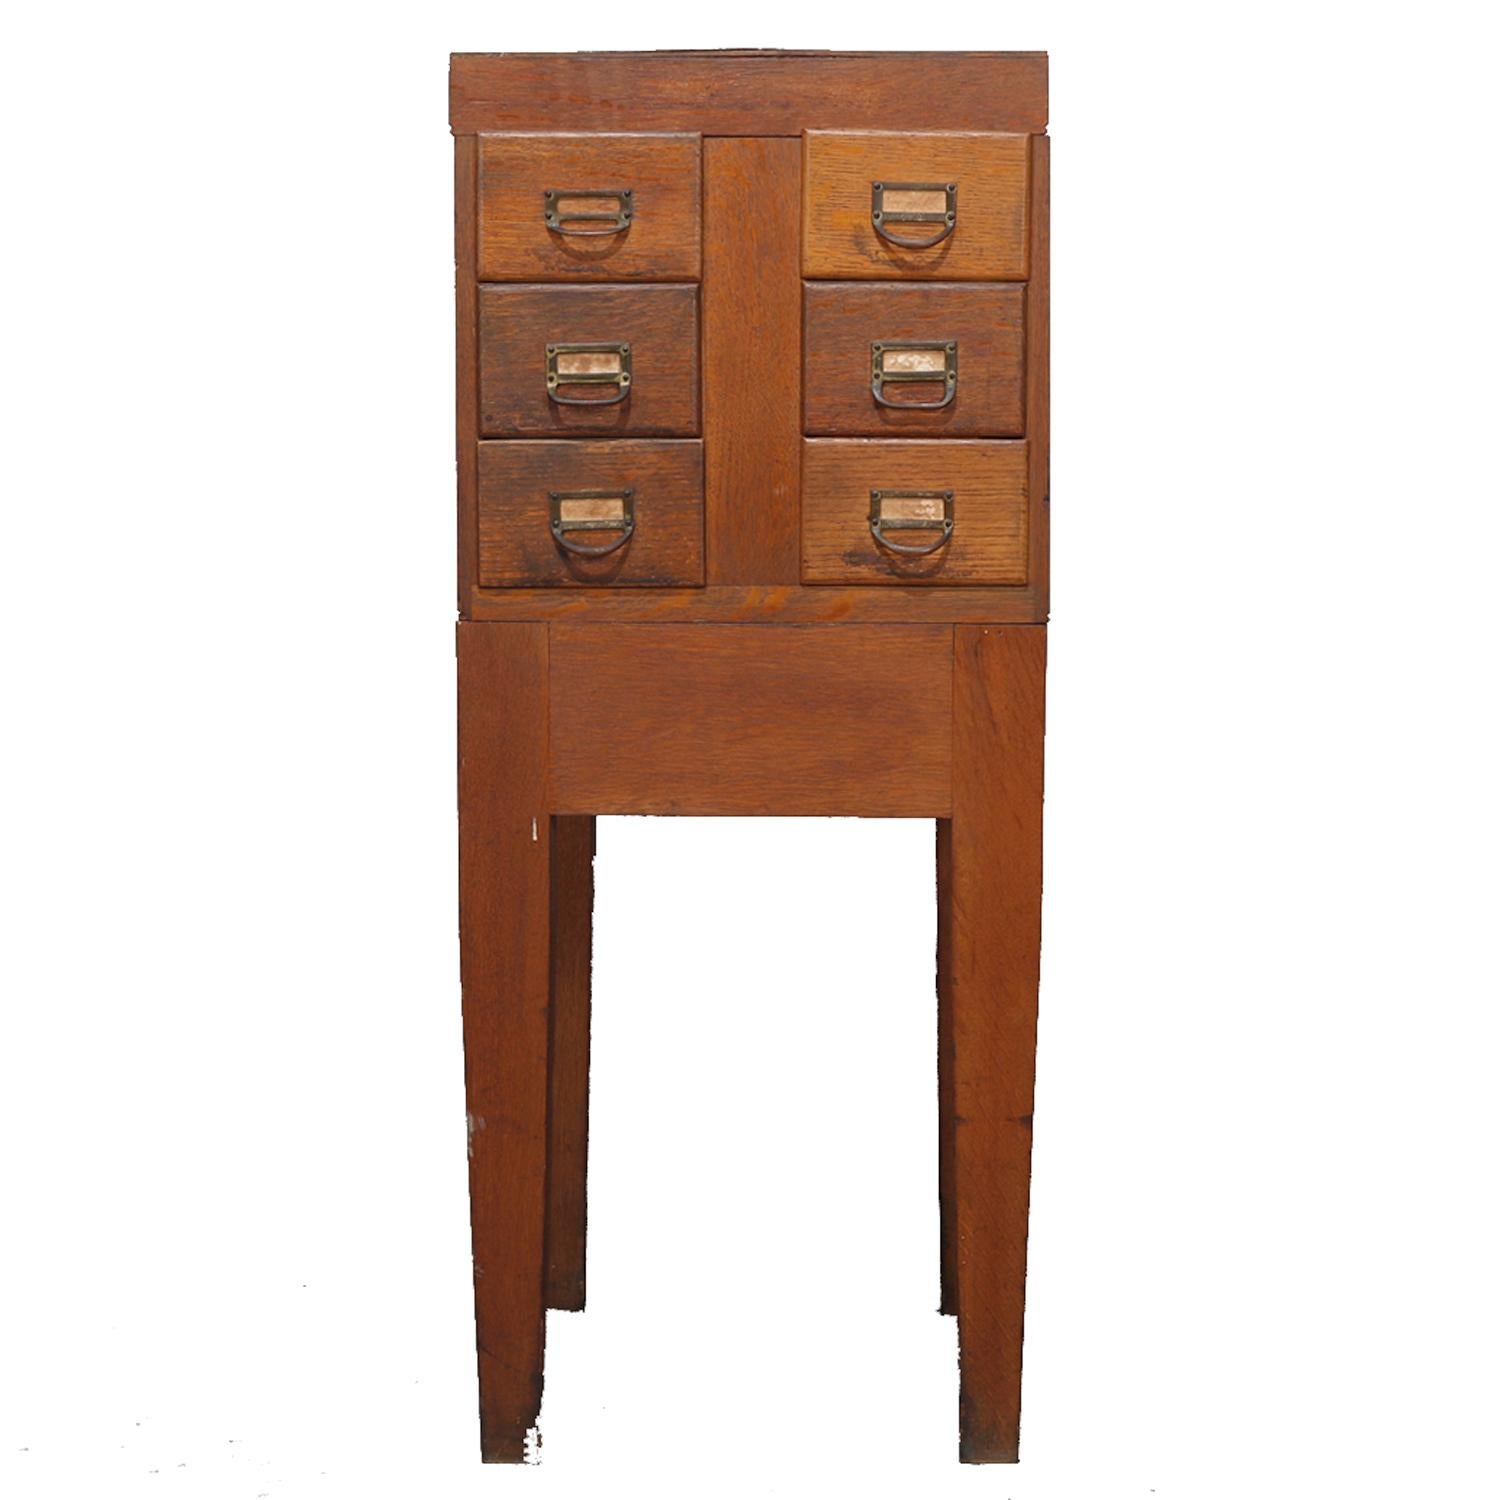 An antique Arts & Crafts filing cabinet offers quarter sawn oak construction with upper card catalog case having six drawers and seated on base with square and straight legs, circa 1910.

Measures: 39.5